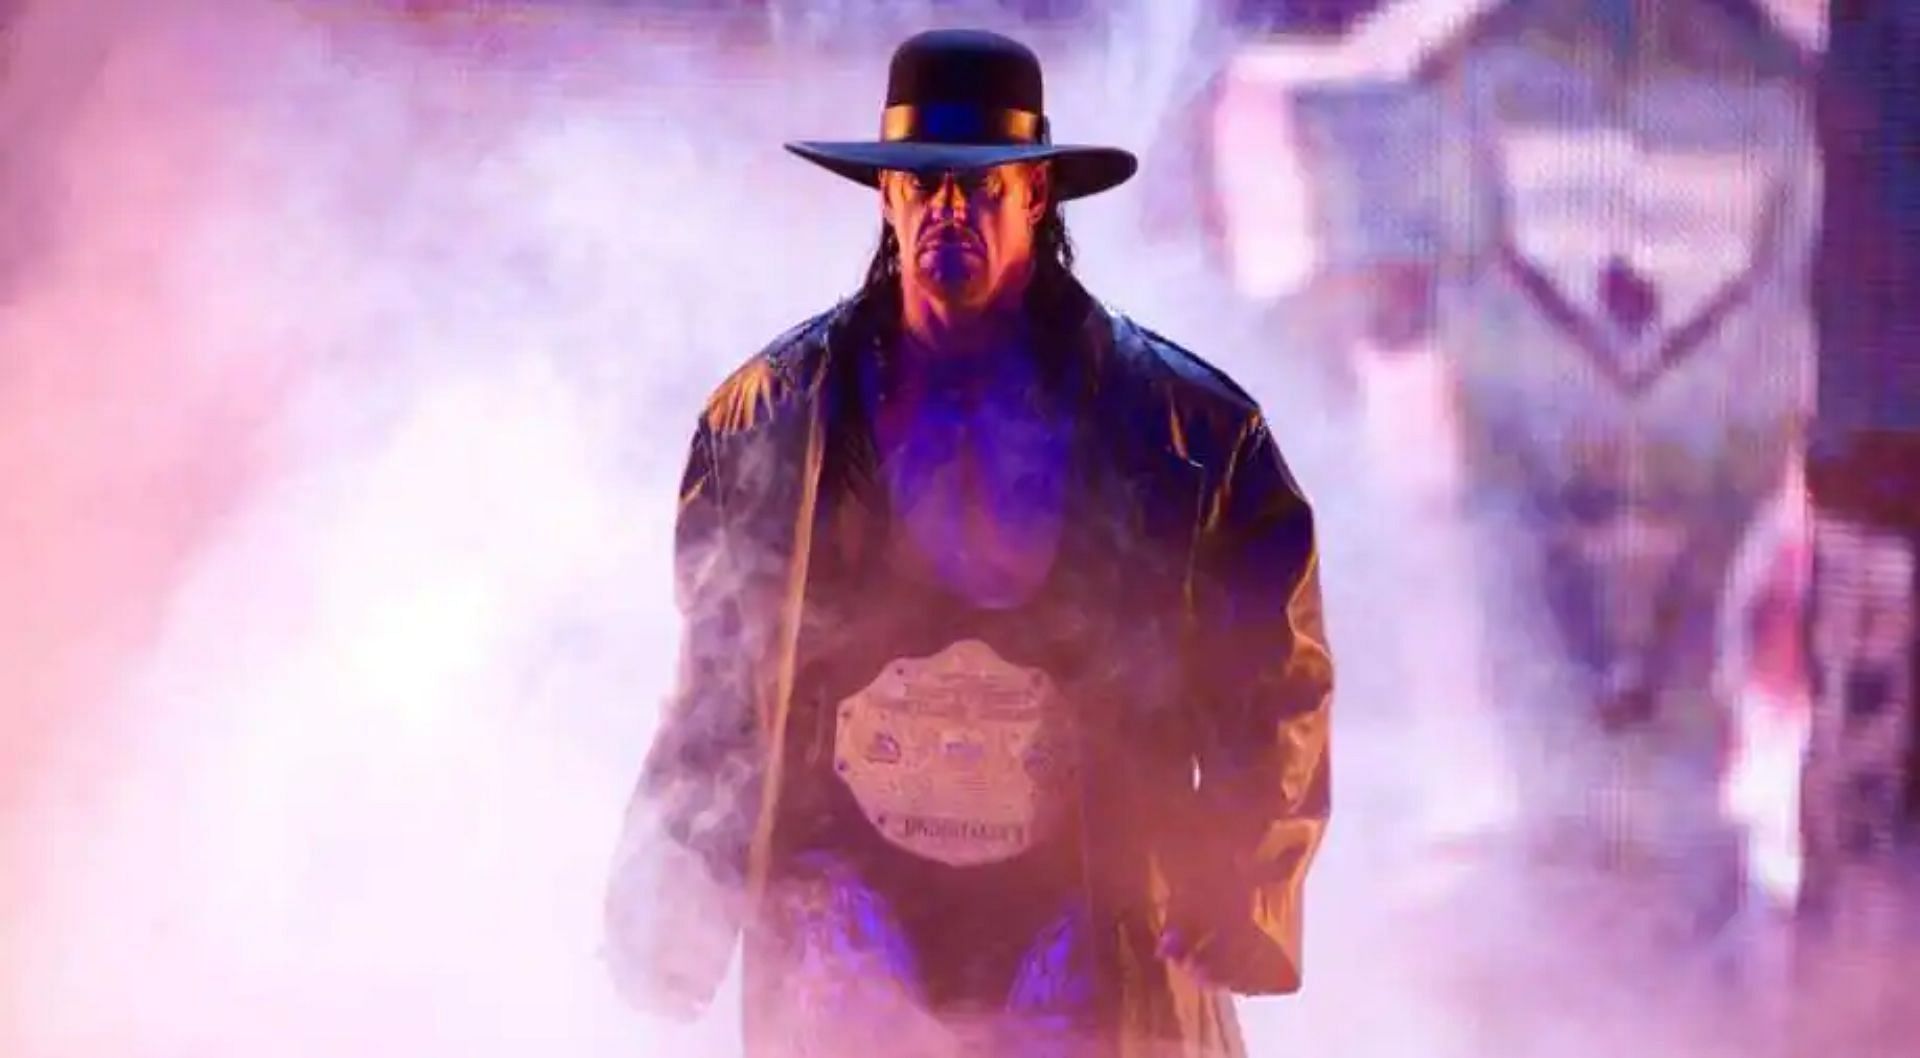 The Undertaker was recently inducted into the WWE Hall Of Fame.